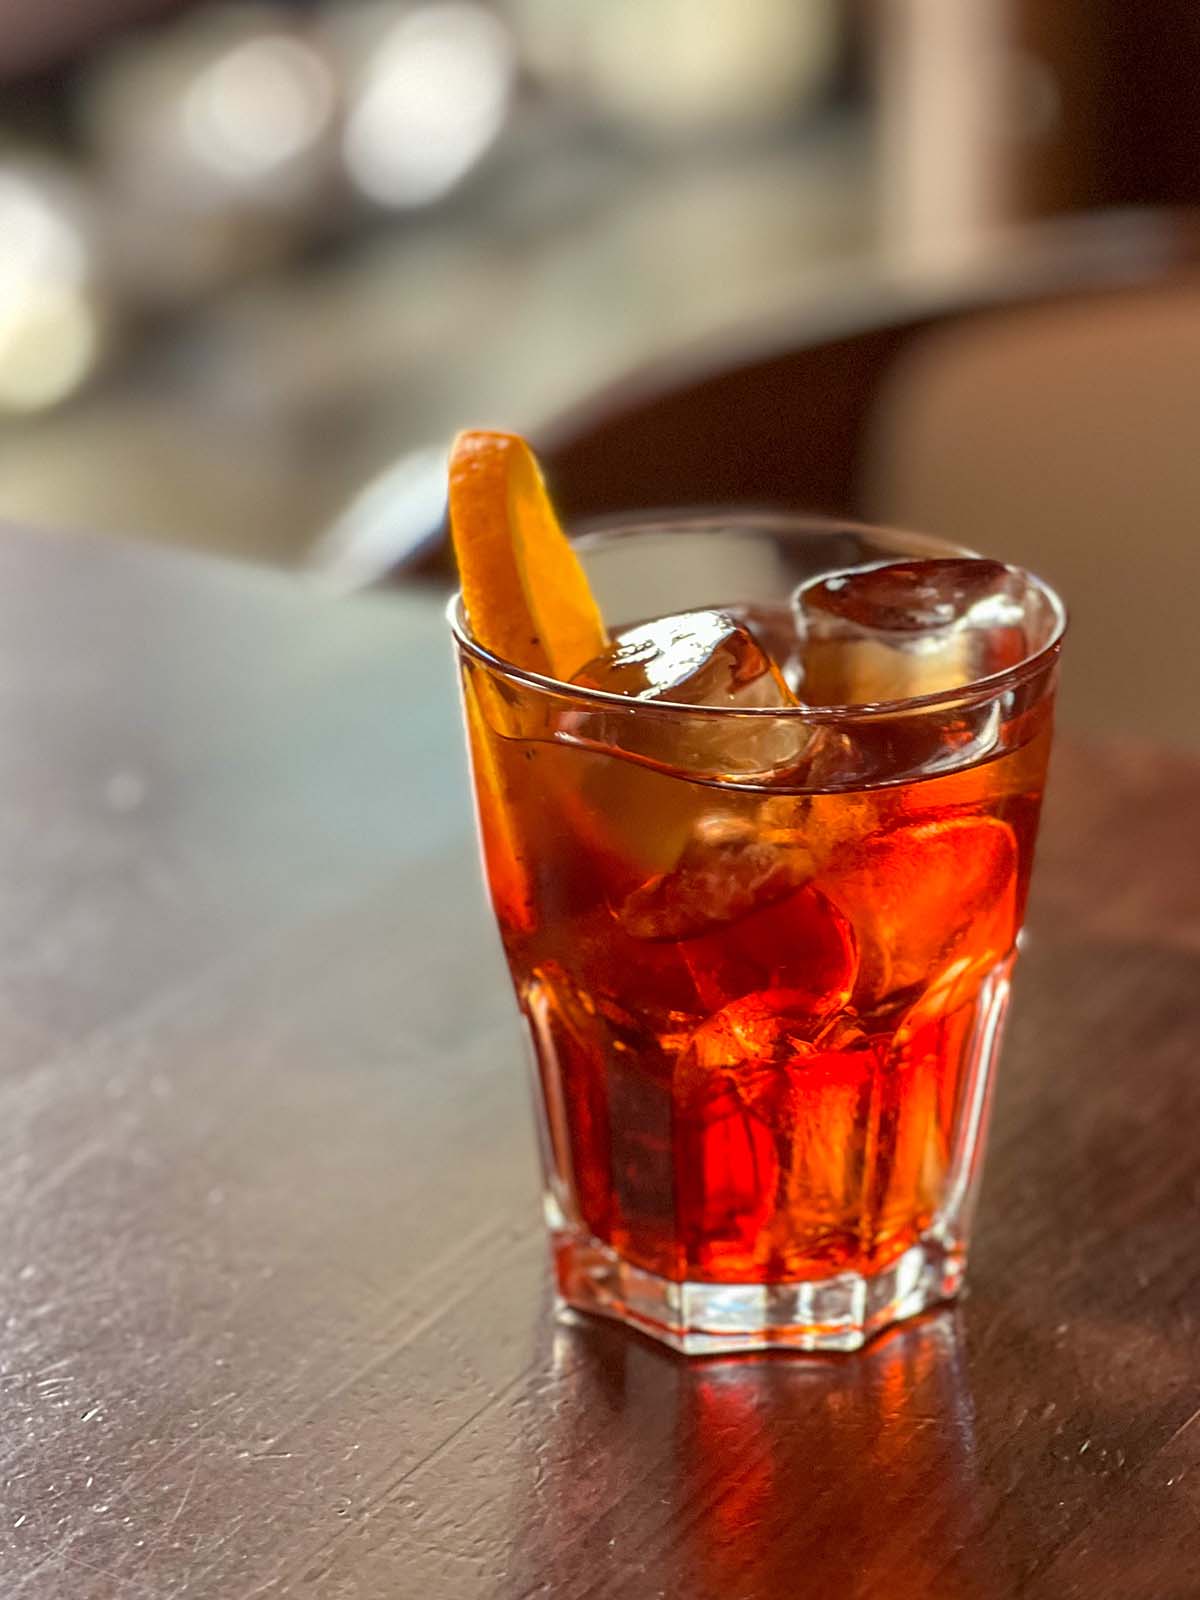 Negroni in a glass.